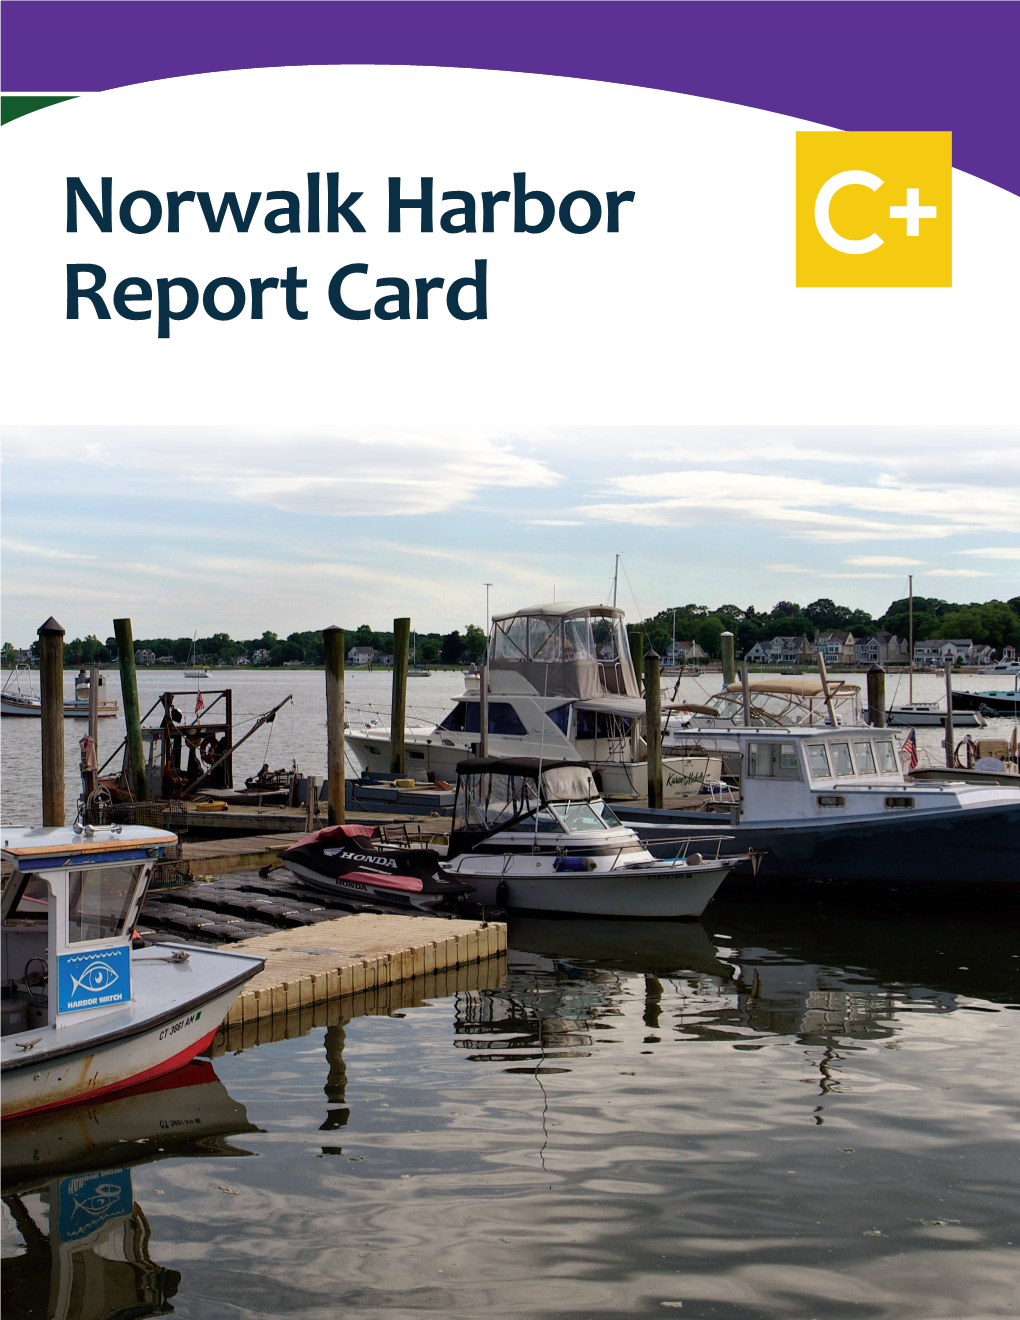 Norwalk Harbor Report Card Is Part of a Larger Effort to Assess Long Island Sound Health on an Annual Basis